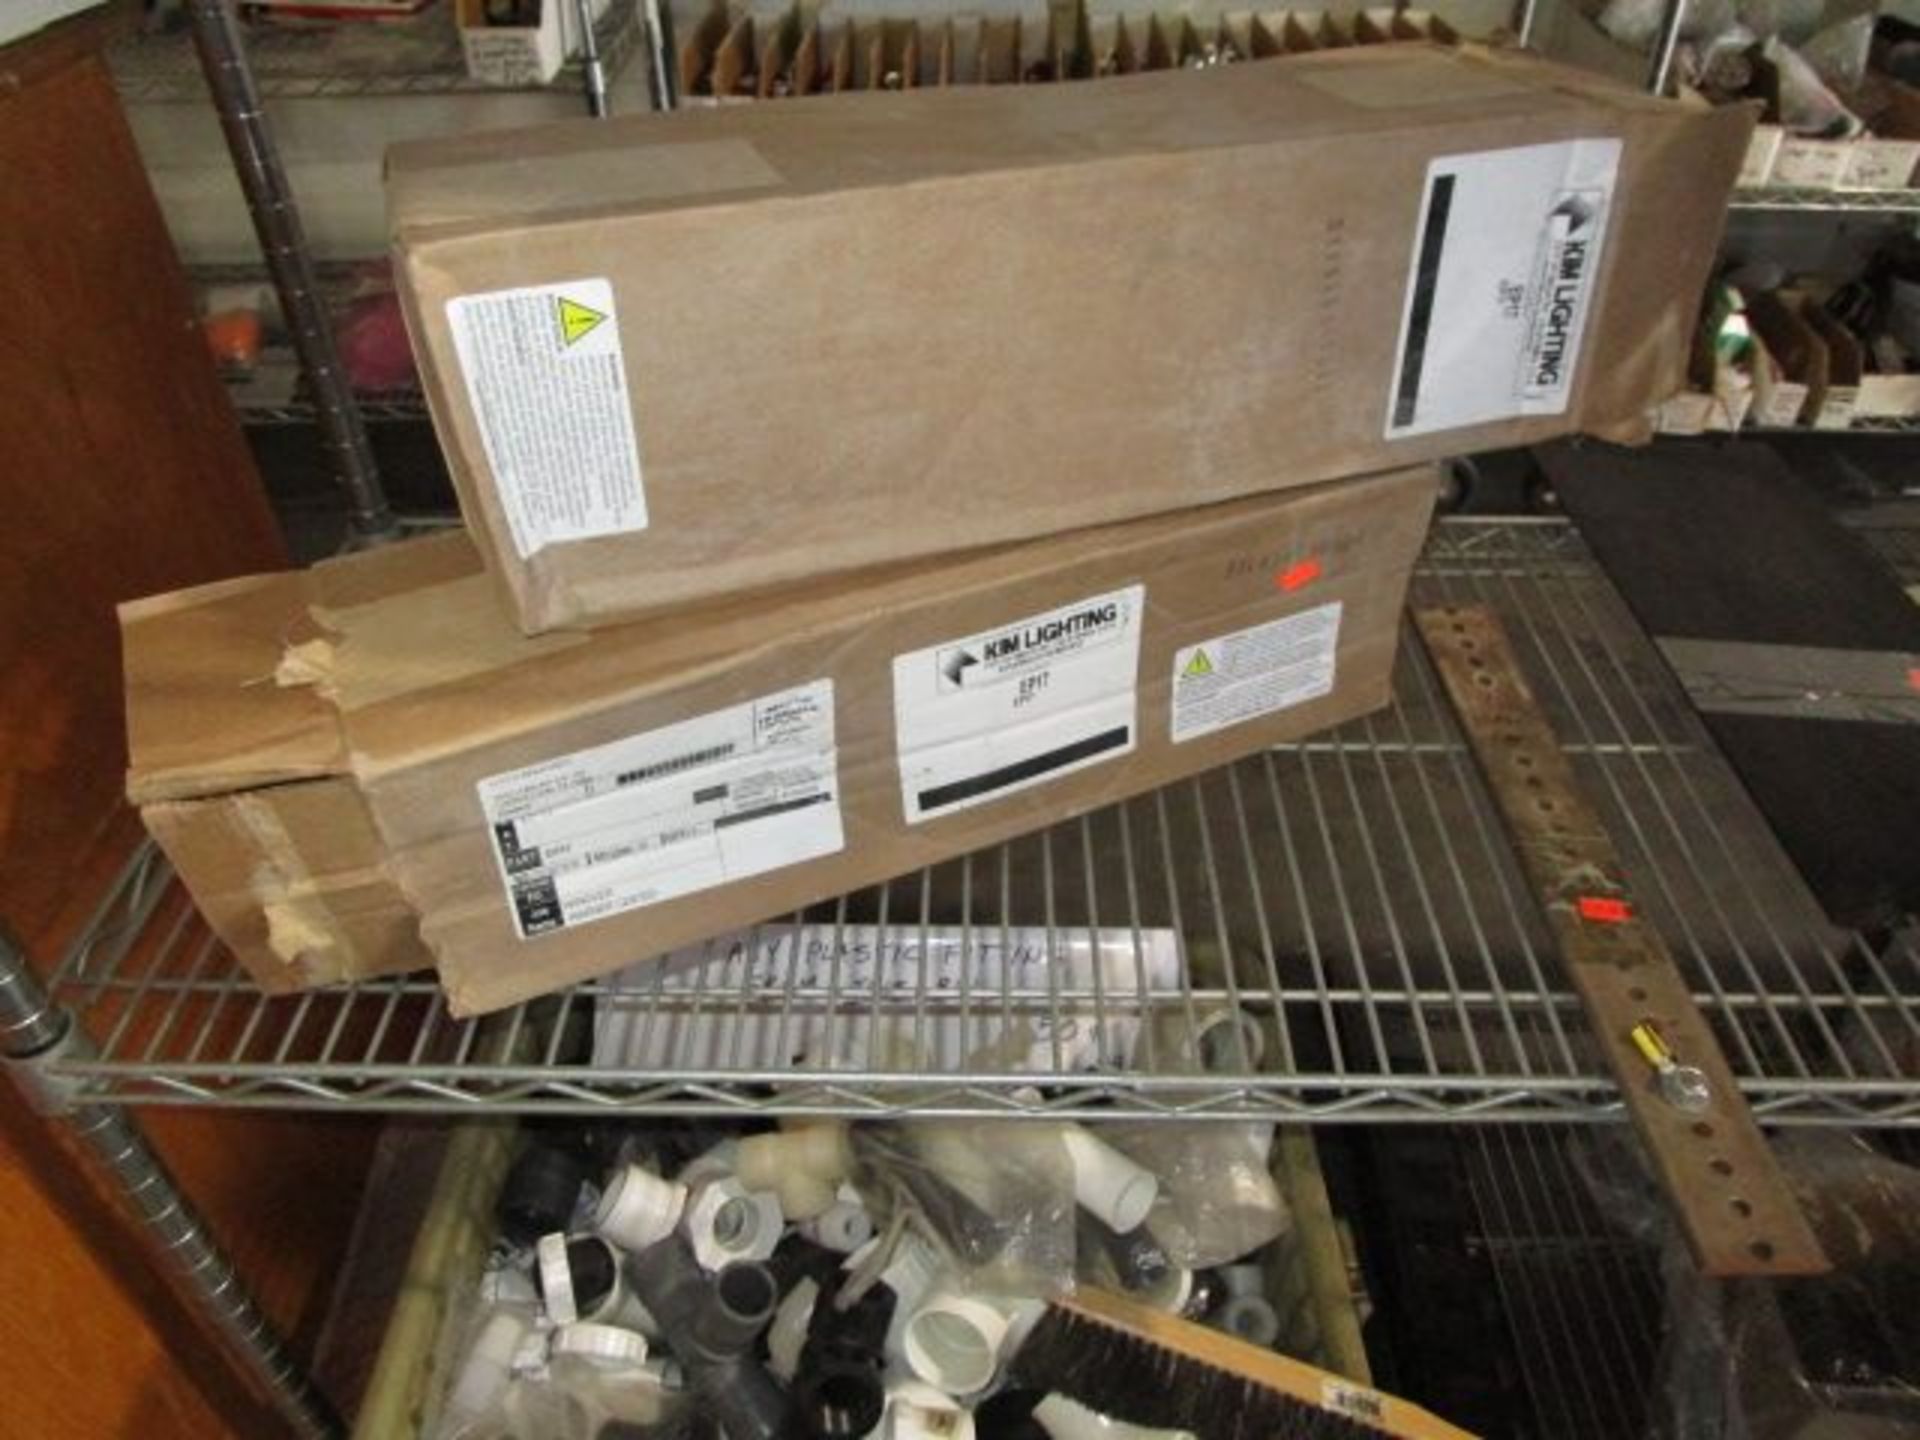 SHELVING UNIT OF CORD/ROPE, BOX OF CHASSIS, PLASTIC FITTINGS - Image 6 of 9